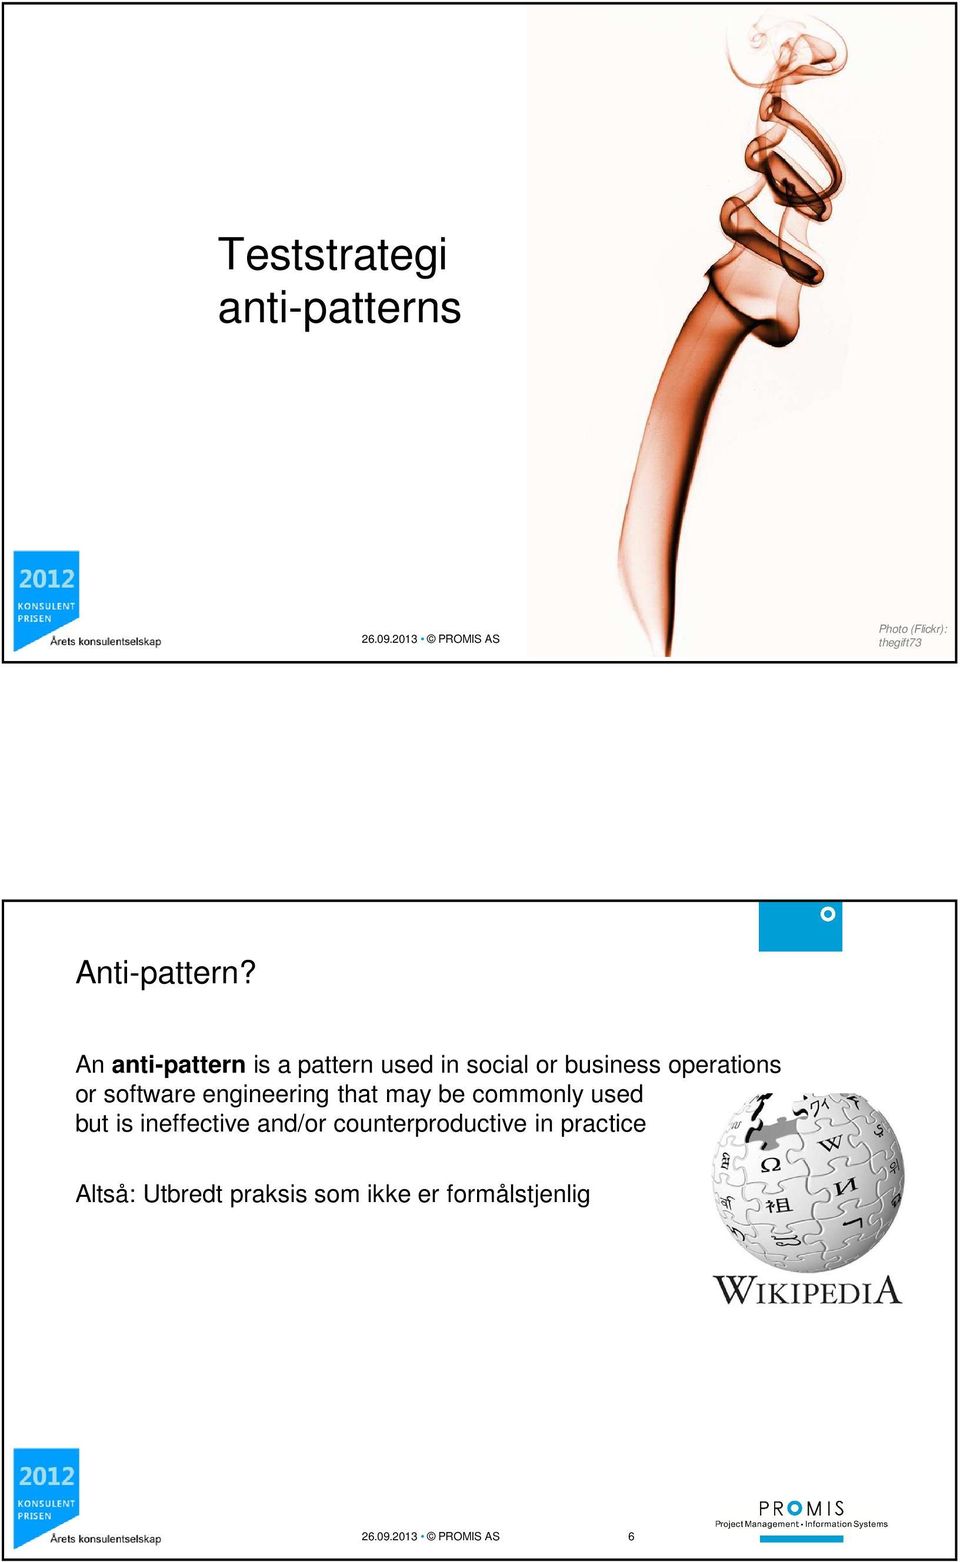 An anti-pattern is a pattern used in social or business operations or software